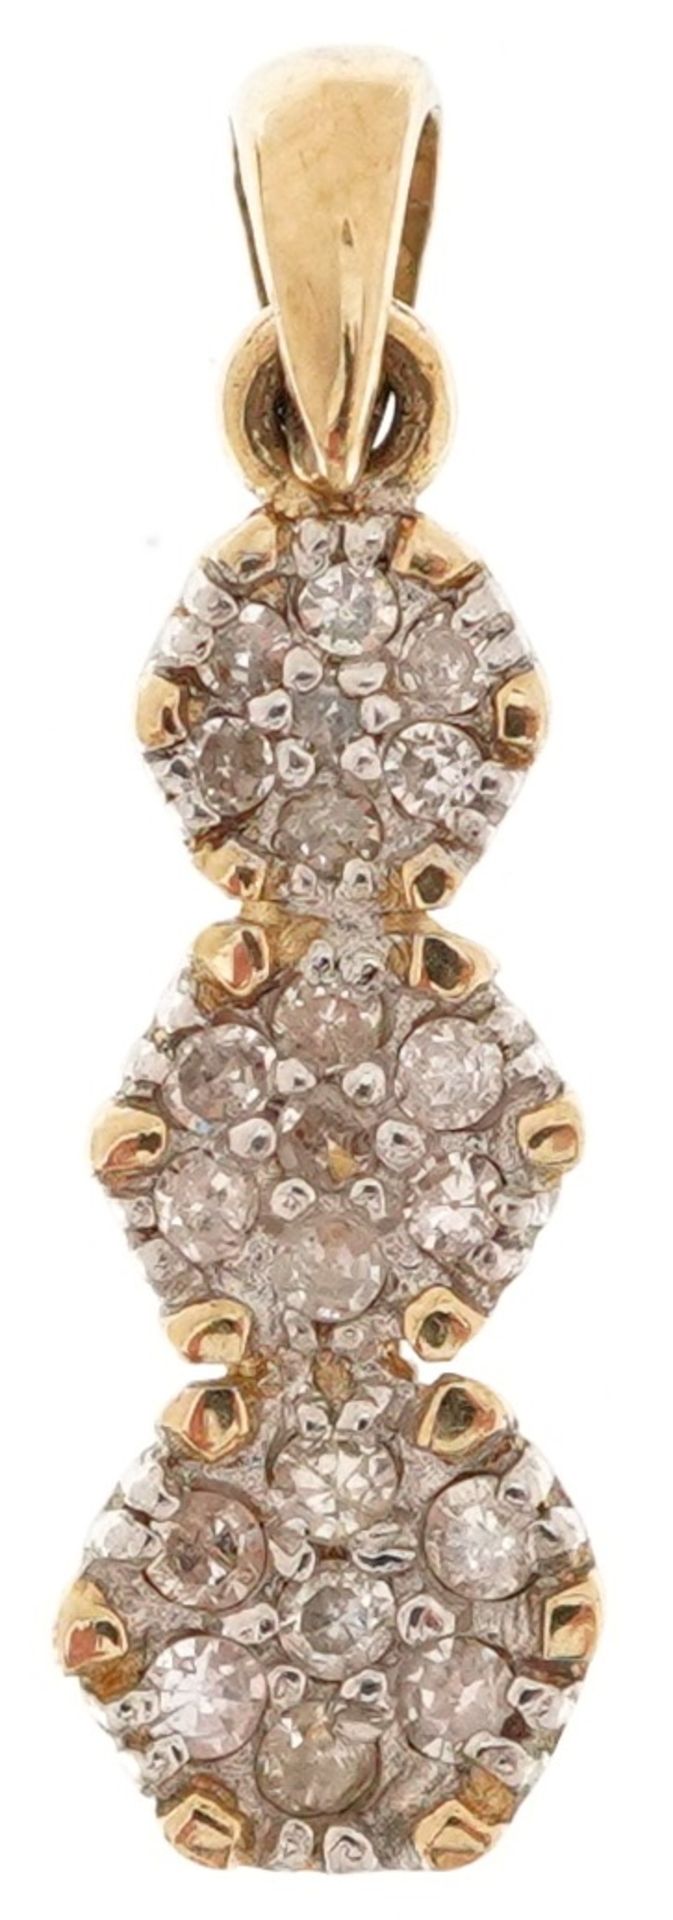 9ct gold diamond cluster pendant, total diamond weight approximately 0.15 carat, 1.8cm high, 0.7g